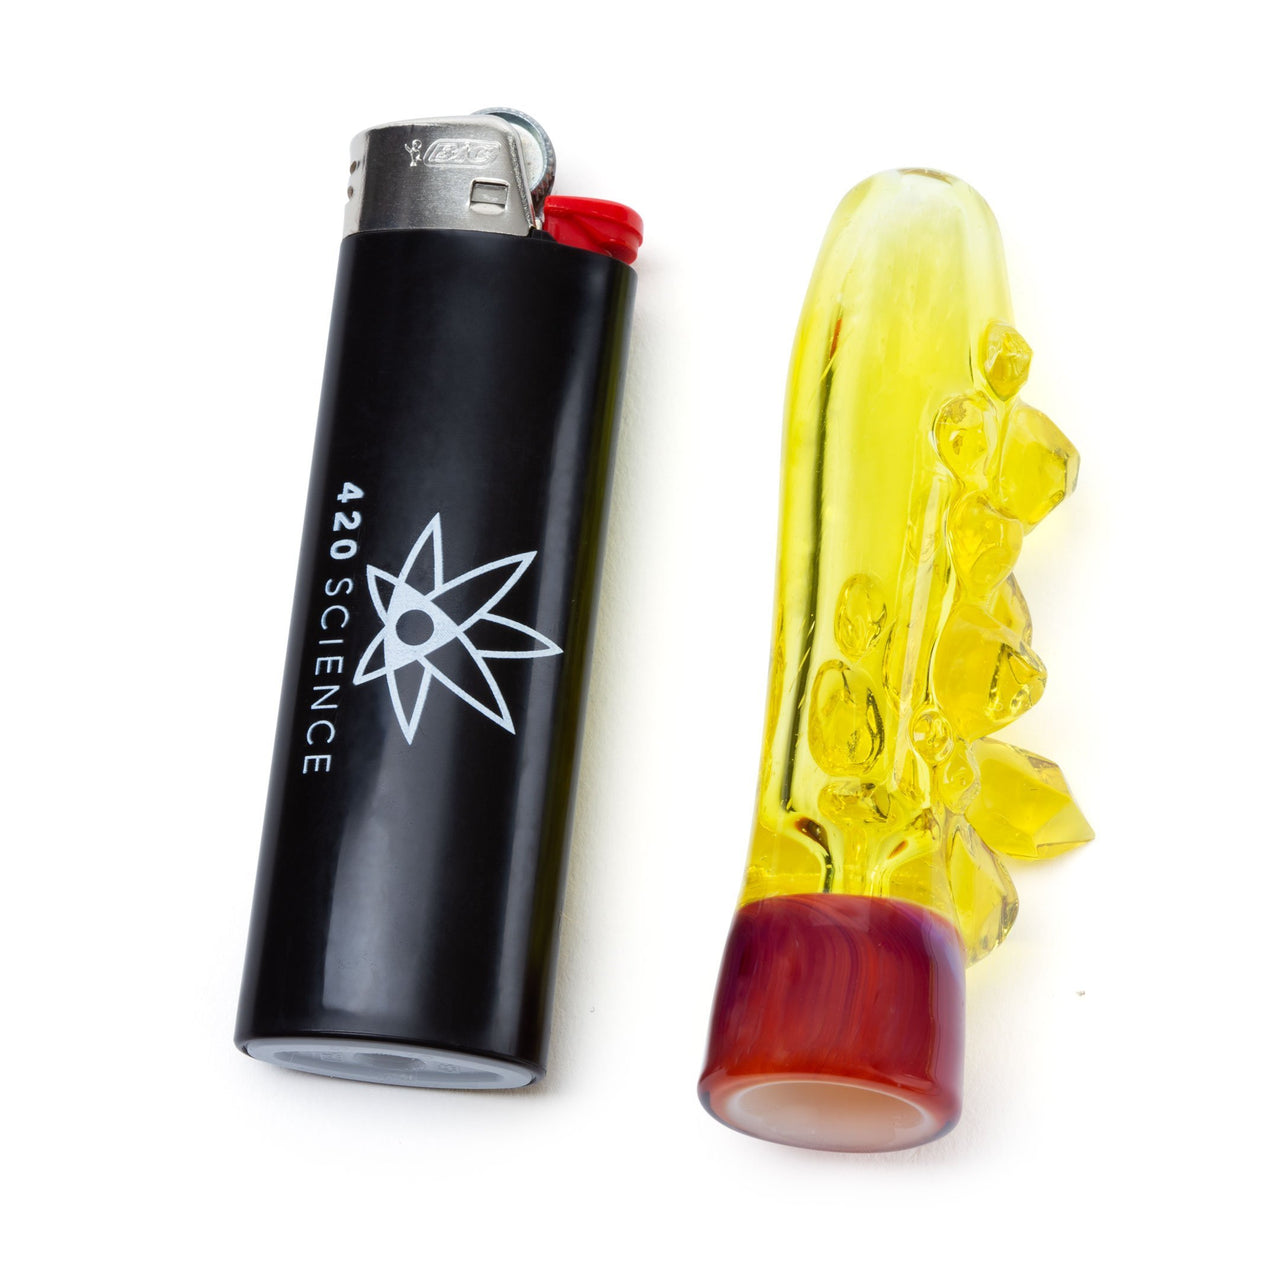 Northern Waters Glass Chillum - Lemon Drop/Serendipity w/Terps CFL Cluster